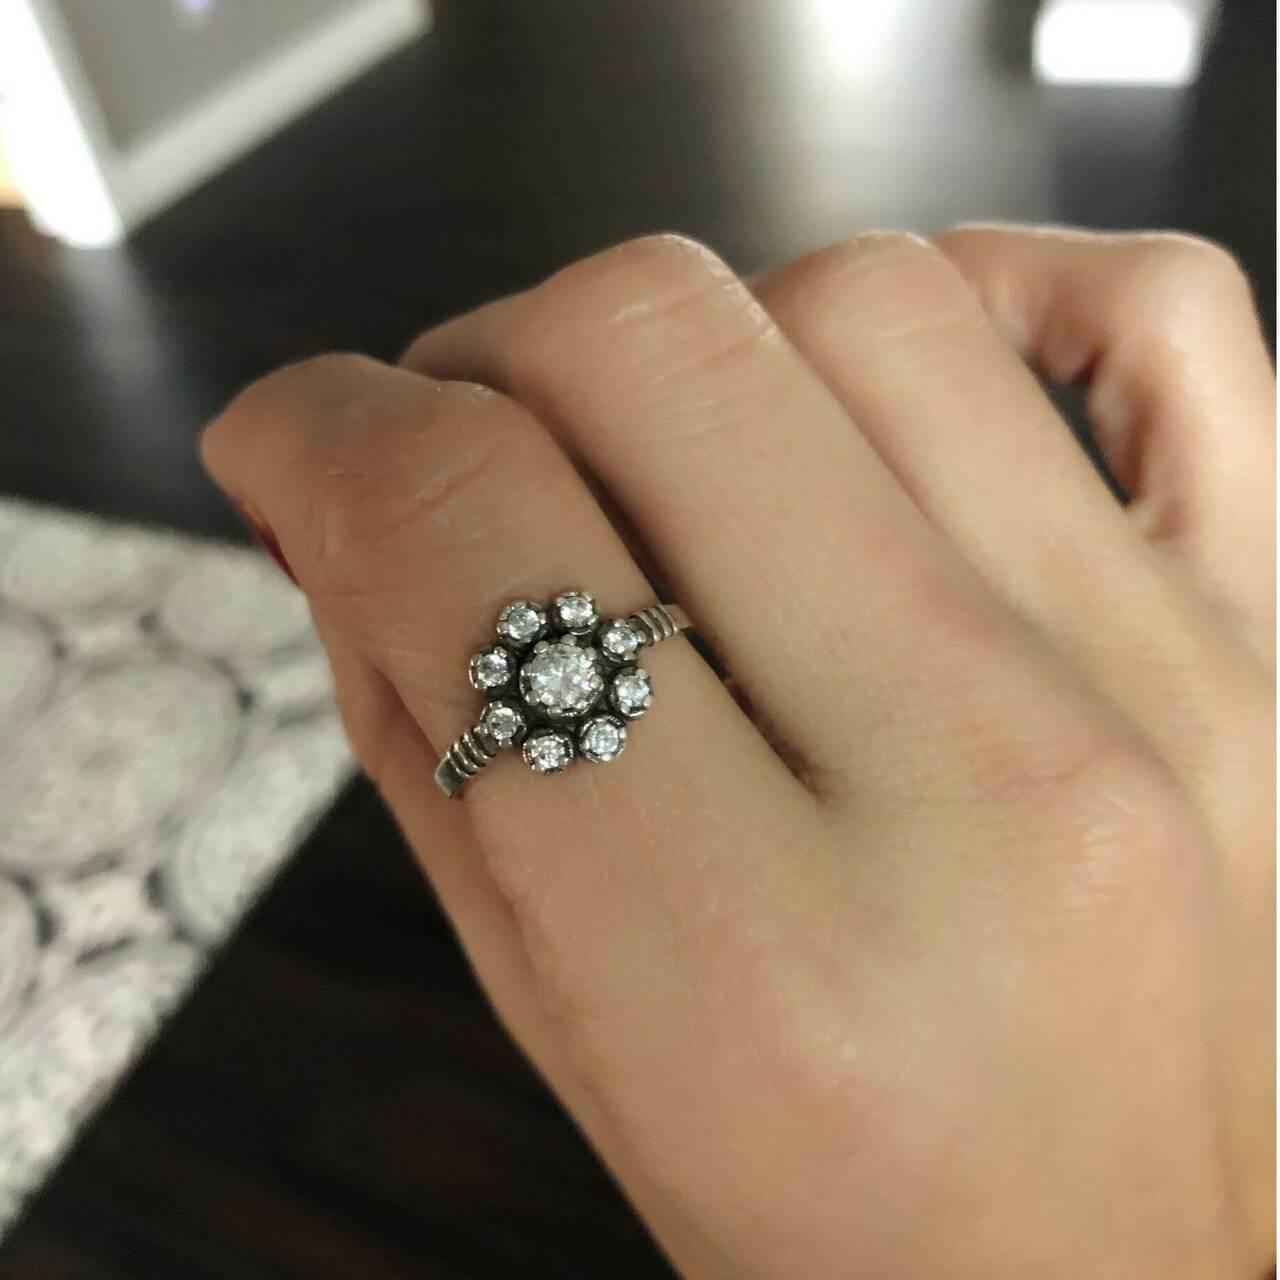 Handcrafted .925 sterling silver flower ring with CZ accents